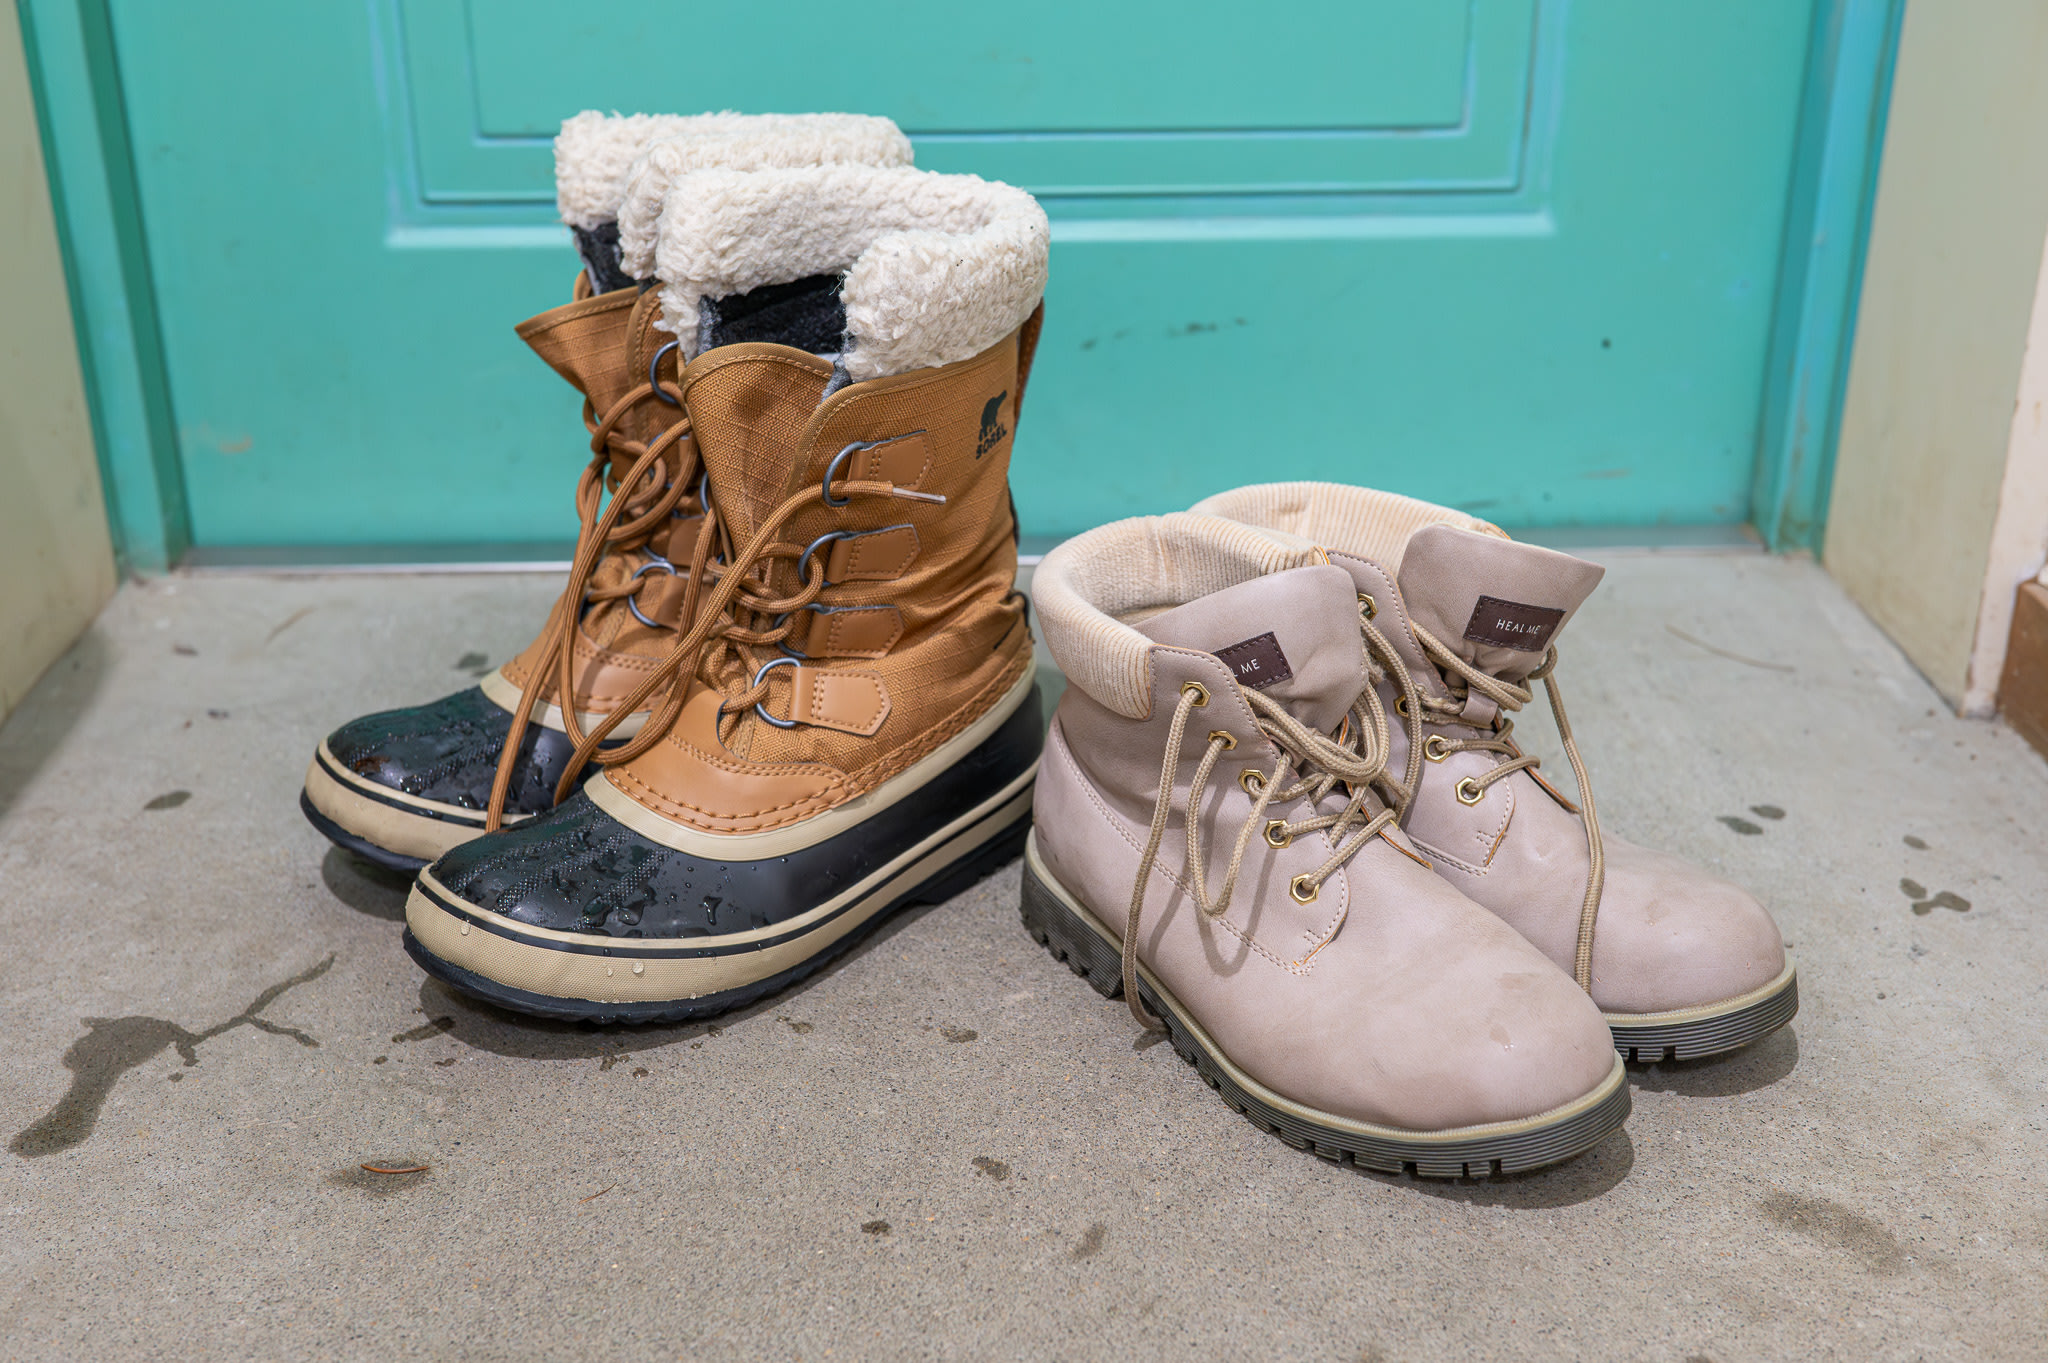 Two pairs of boots on a concrete floor. Both are snow boots, but one is high-cut and the other low-cut.